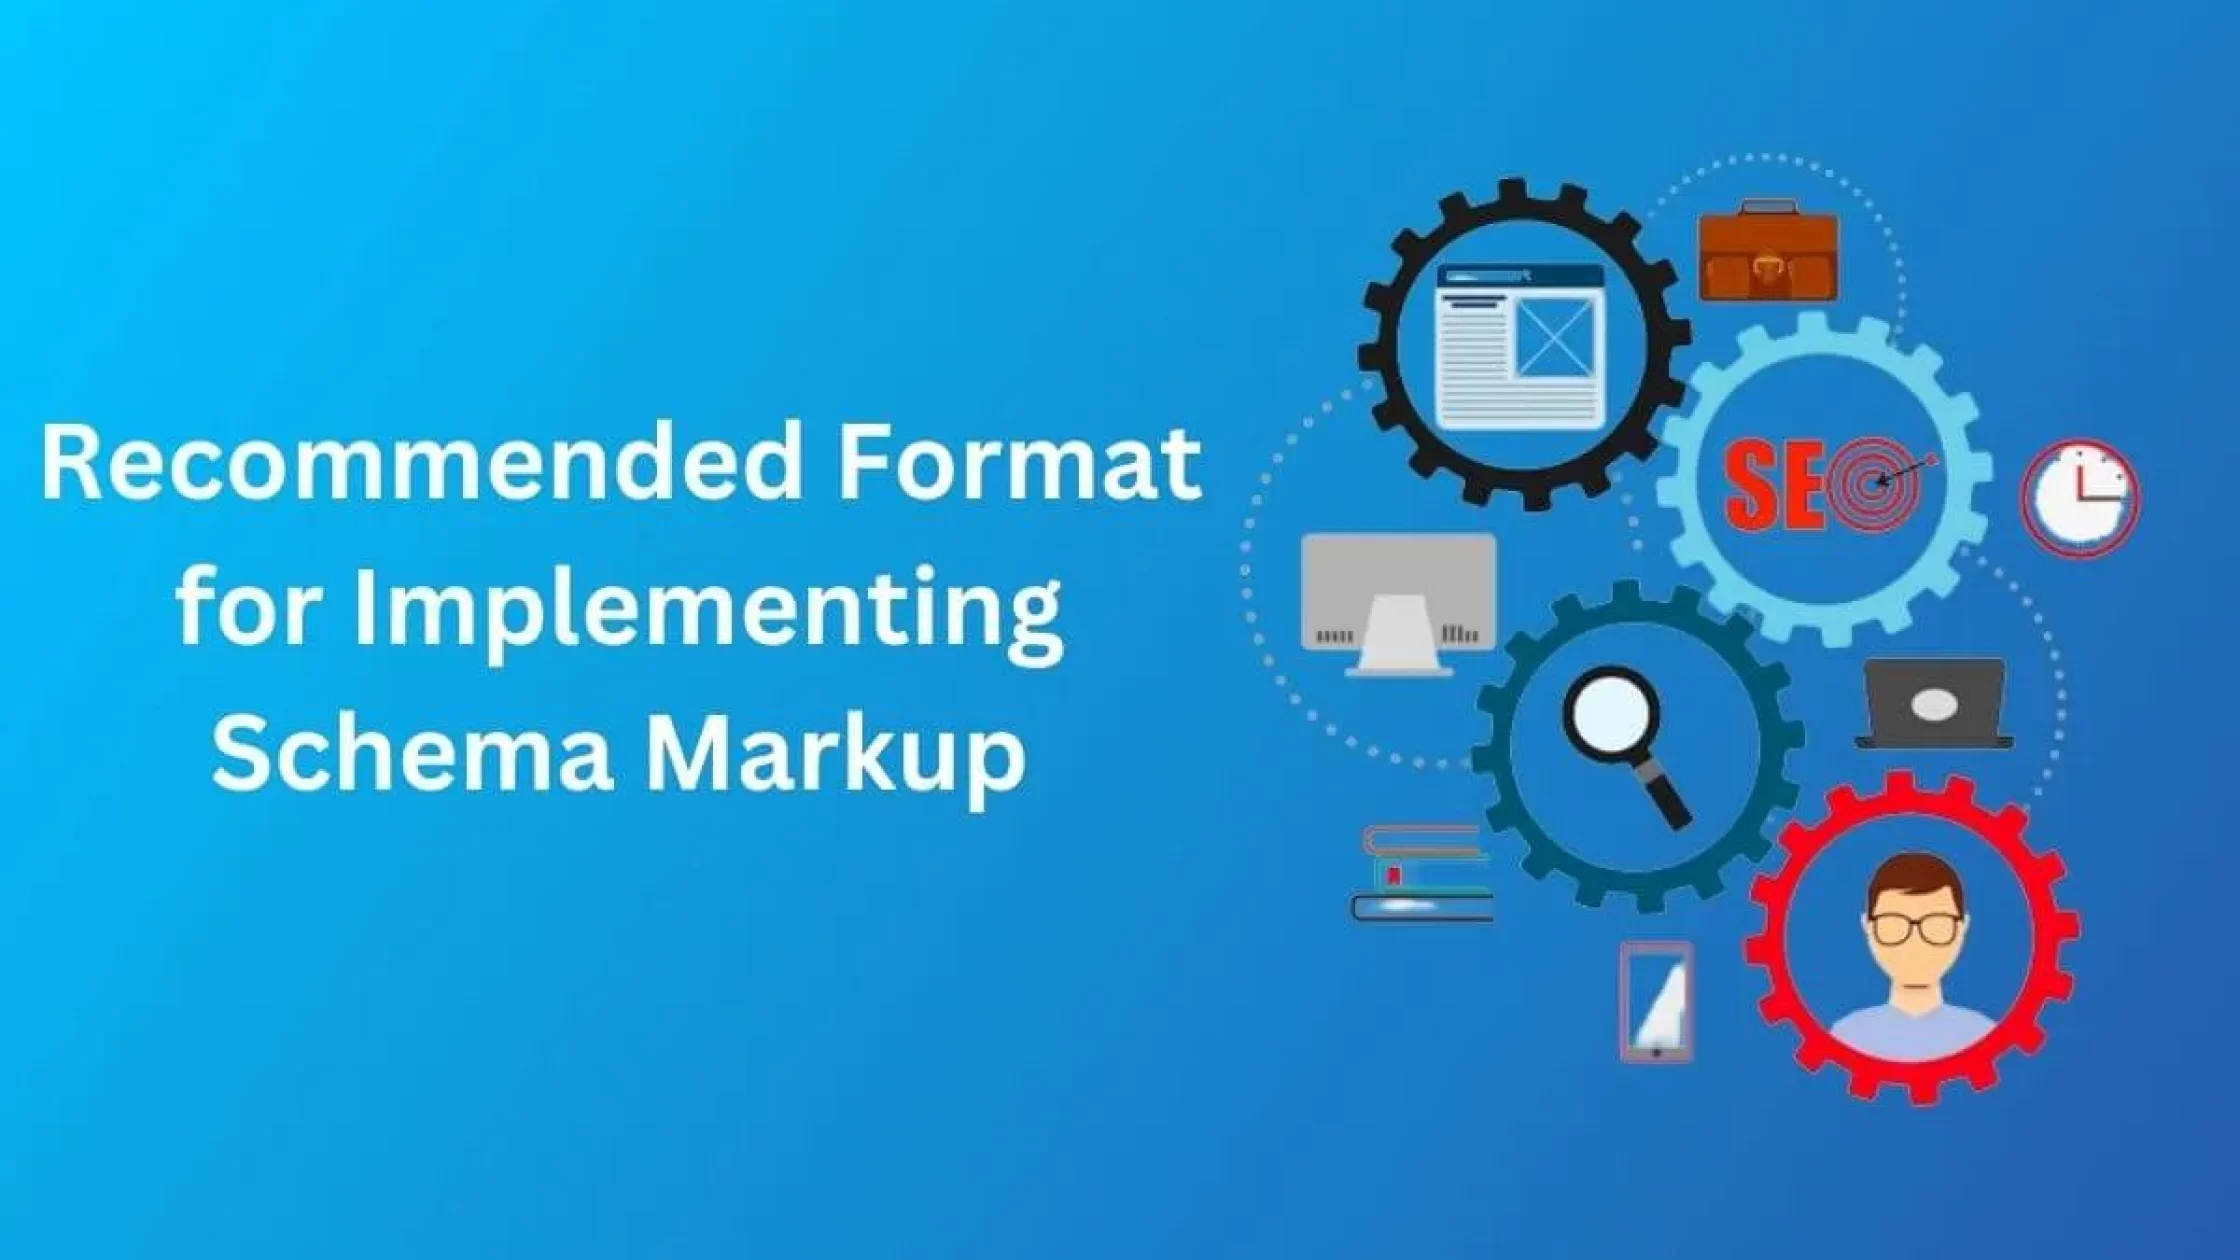 What is the Recommended Format for Implementing Schema Markup?